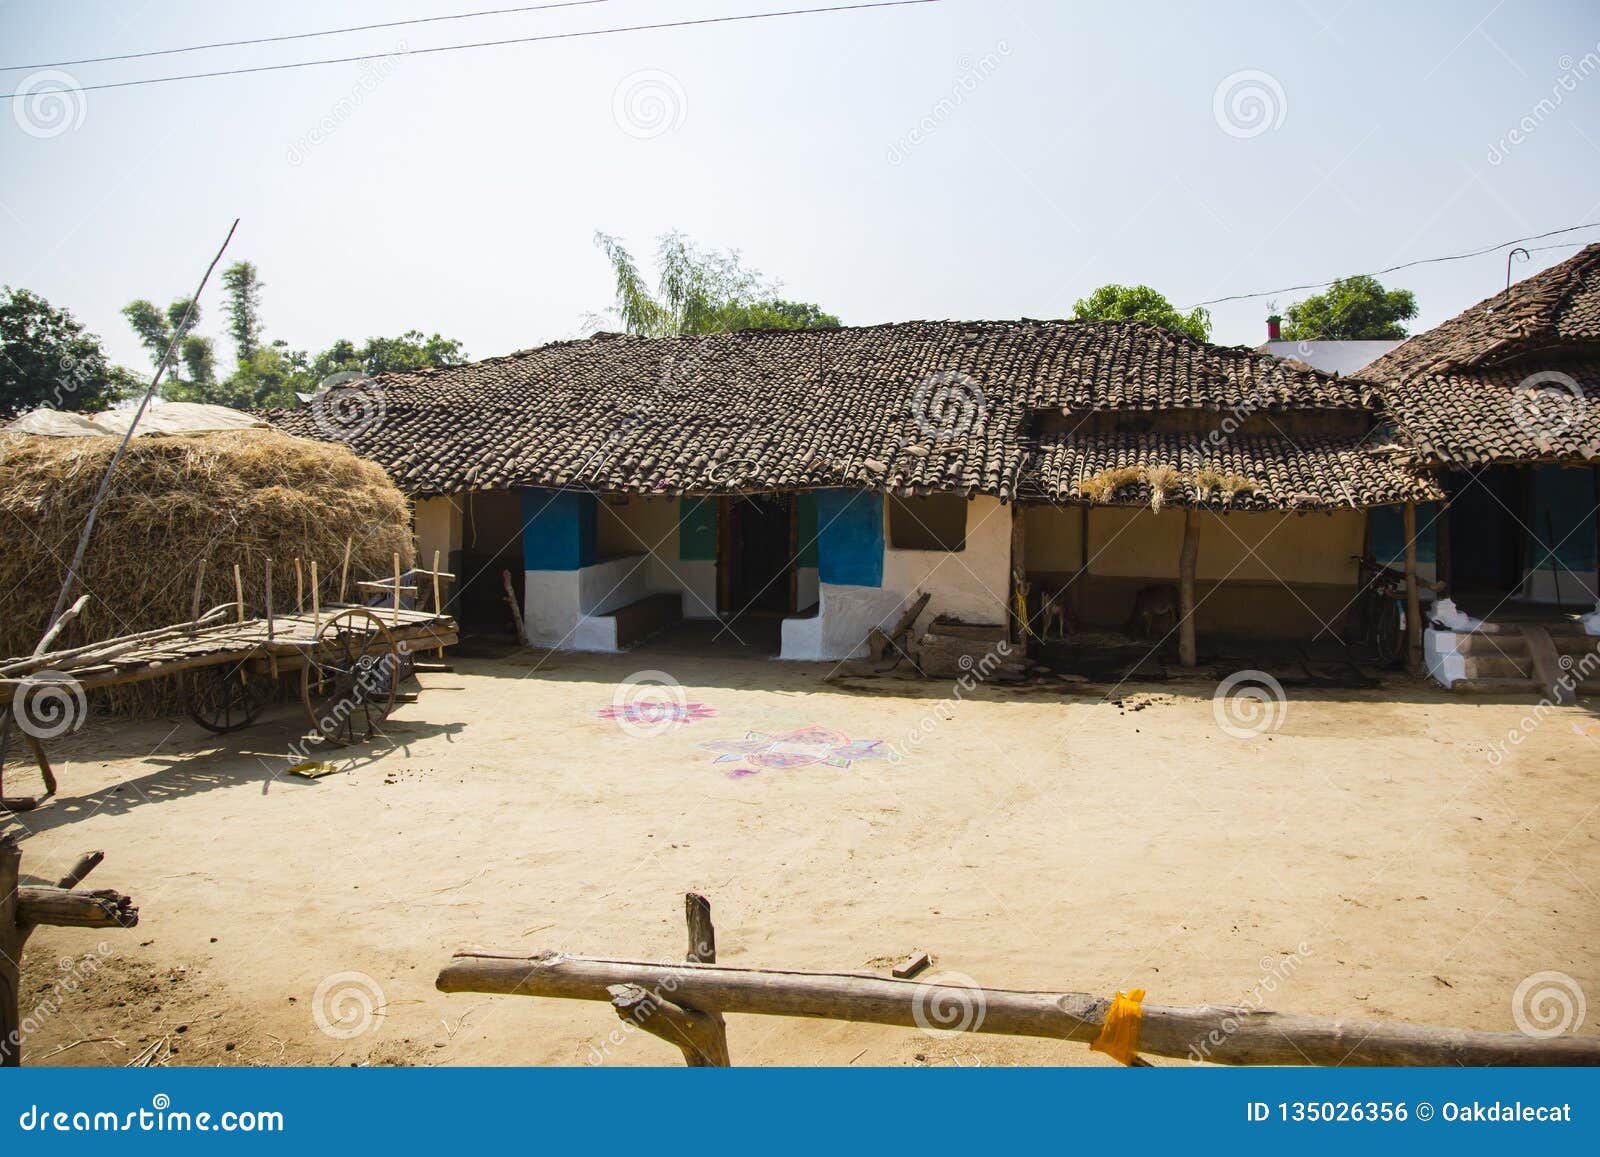 Typical Village Home in India Stock Photo - Image of soil, cement ...